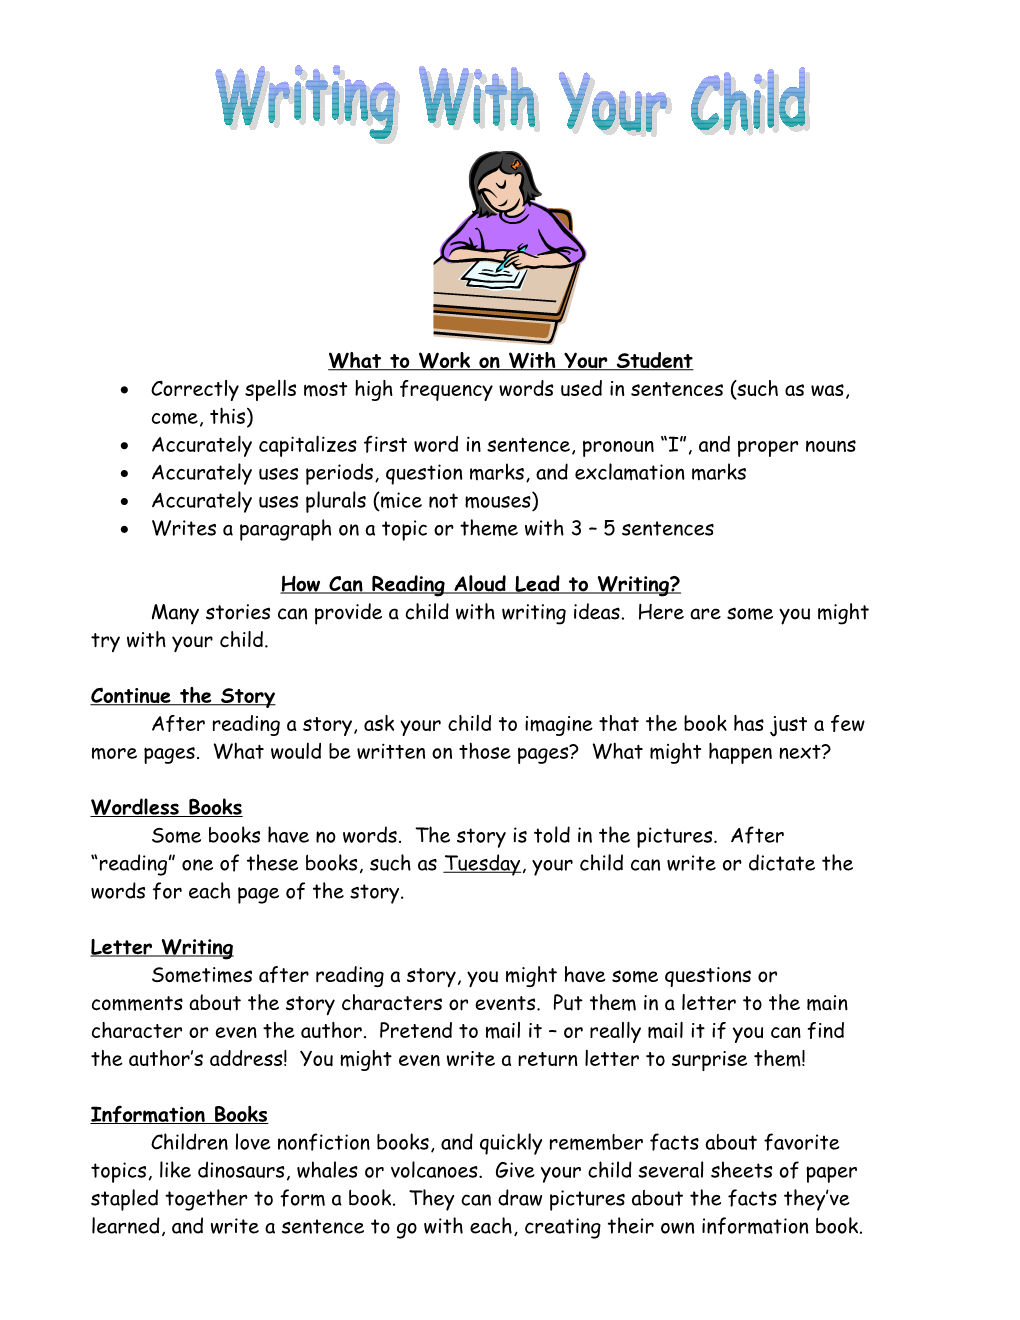 What to Work on with Your Student